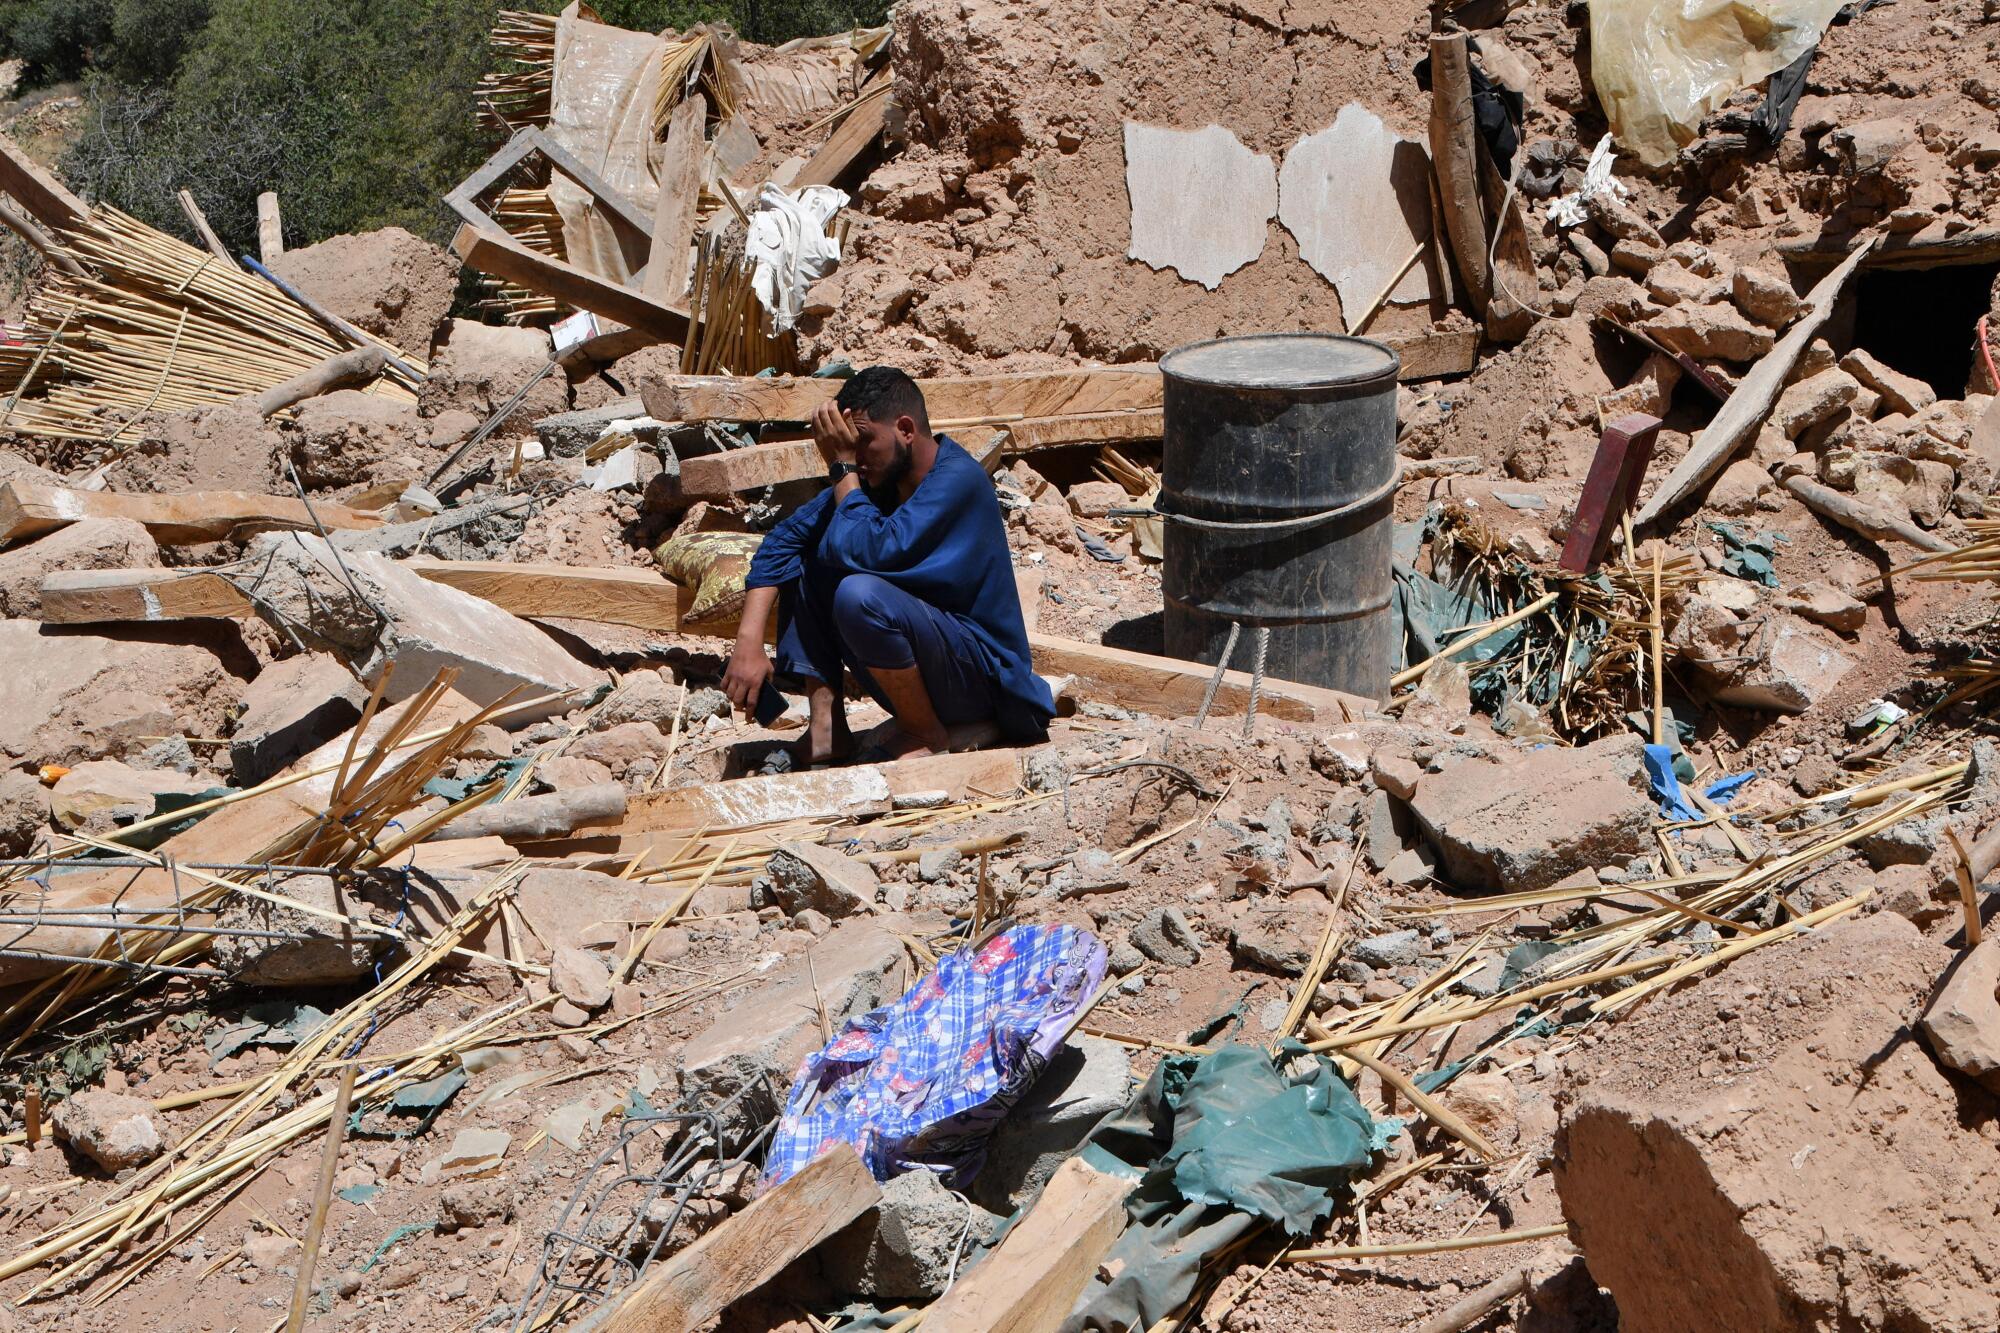 A man cries as he sits on the rubble of a house.